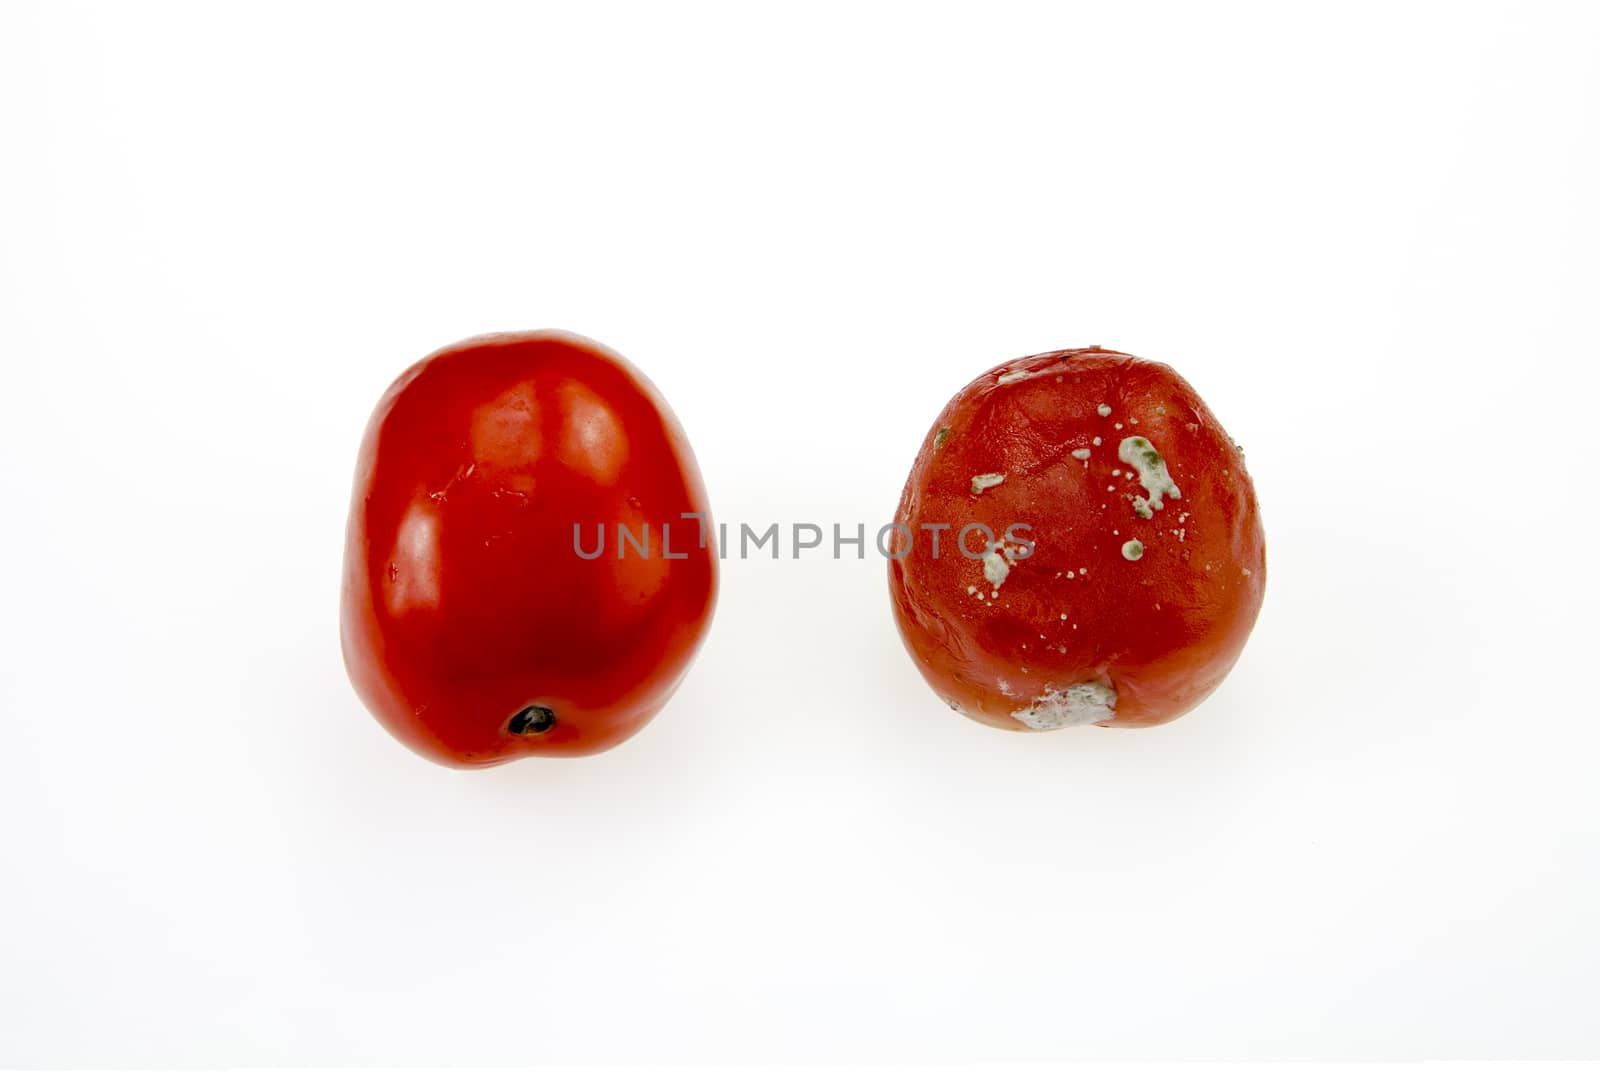 Moldy rotten tomatoes isolate on white background